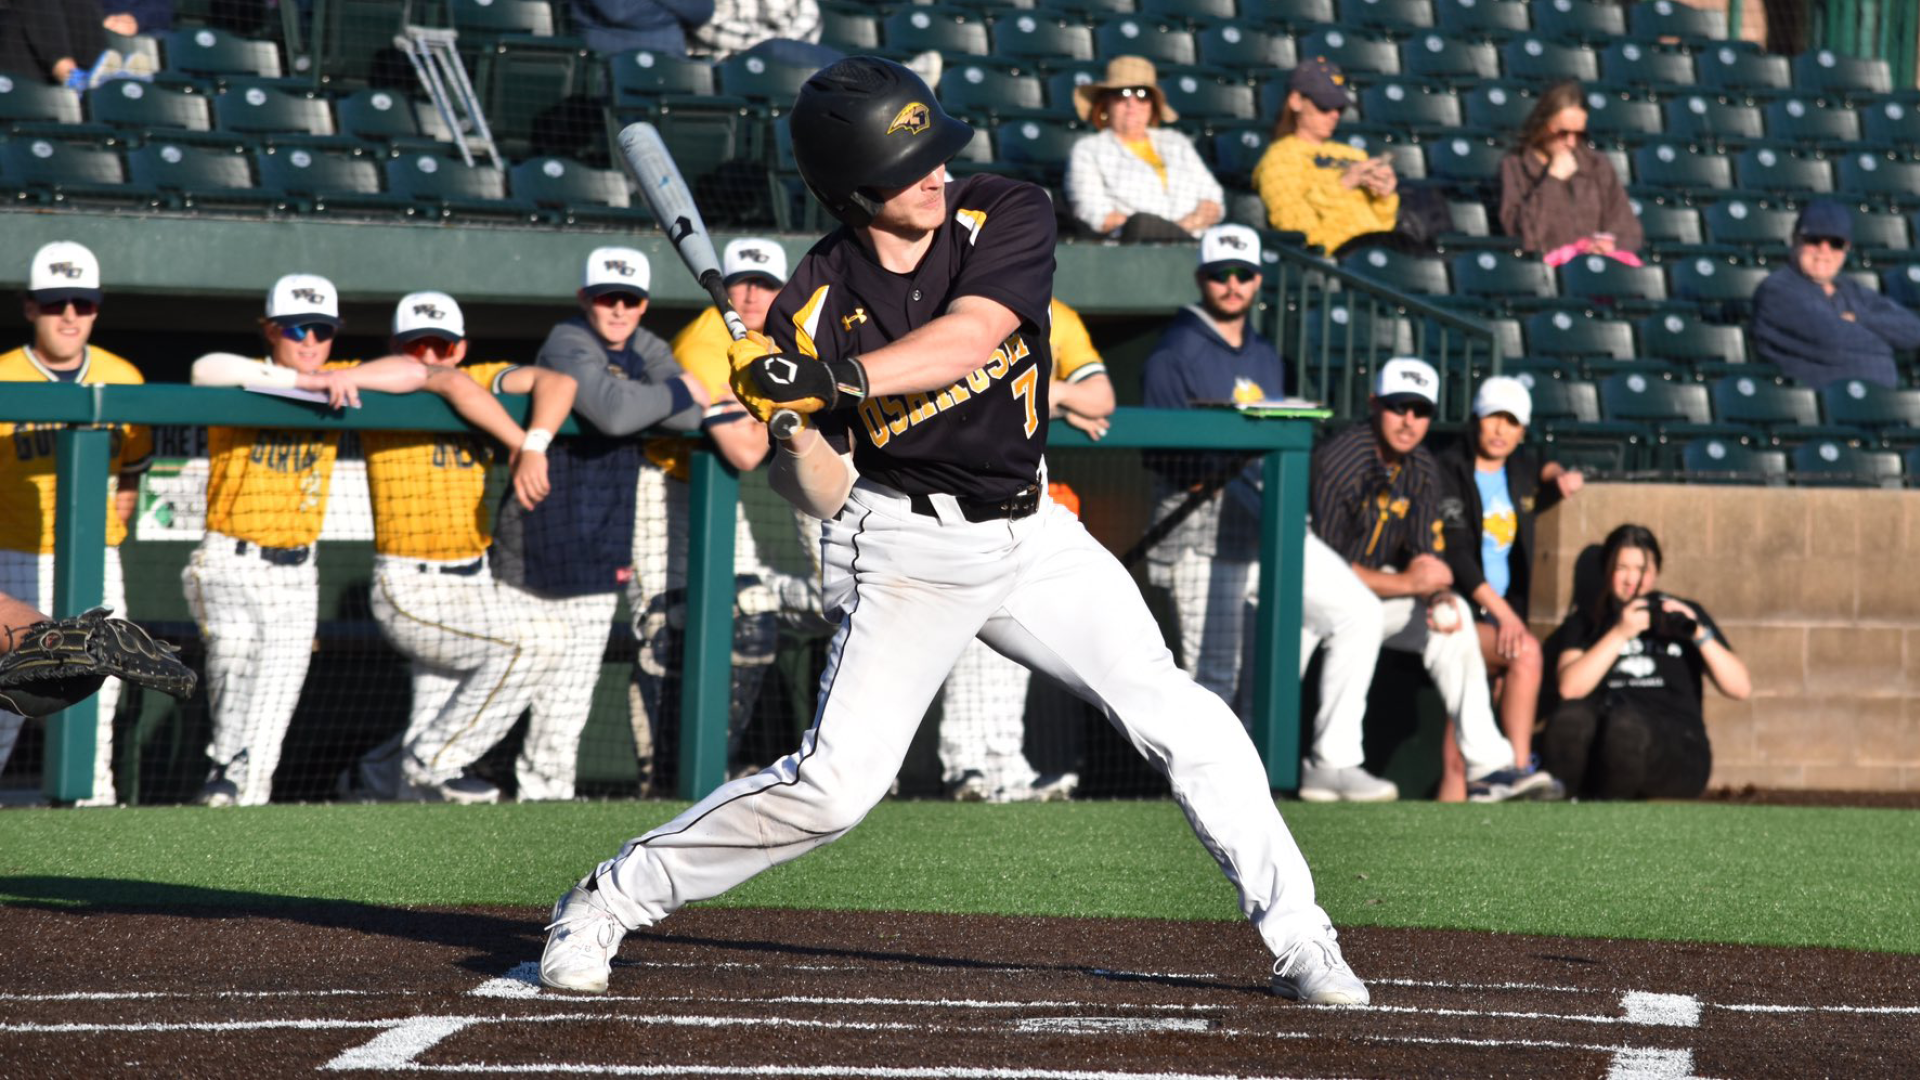 Jake Surane went five-for-eight with an RBI and three runs in the Titans' games against North Park and Webster on Saturday. Photo Credit: Jennifer Zuberbier, UW-Oshkosh Athletics